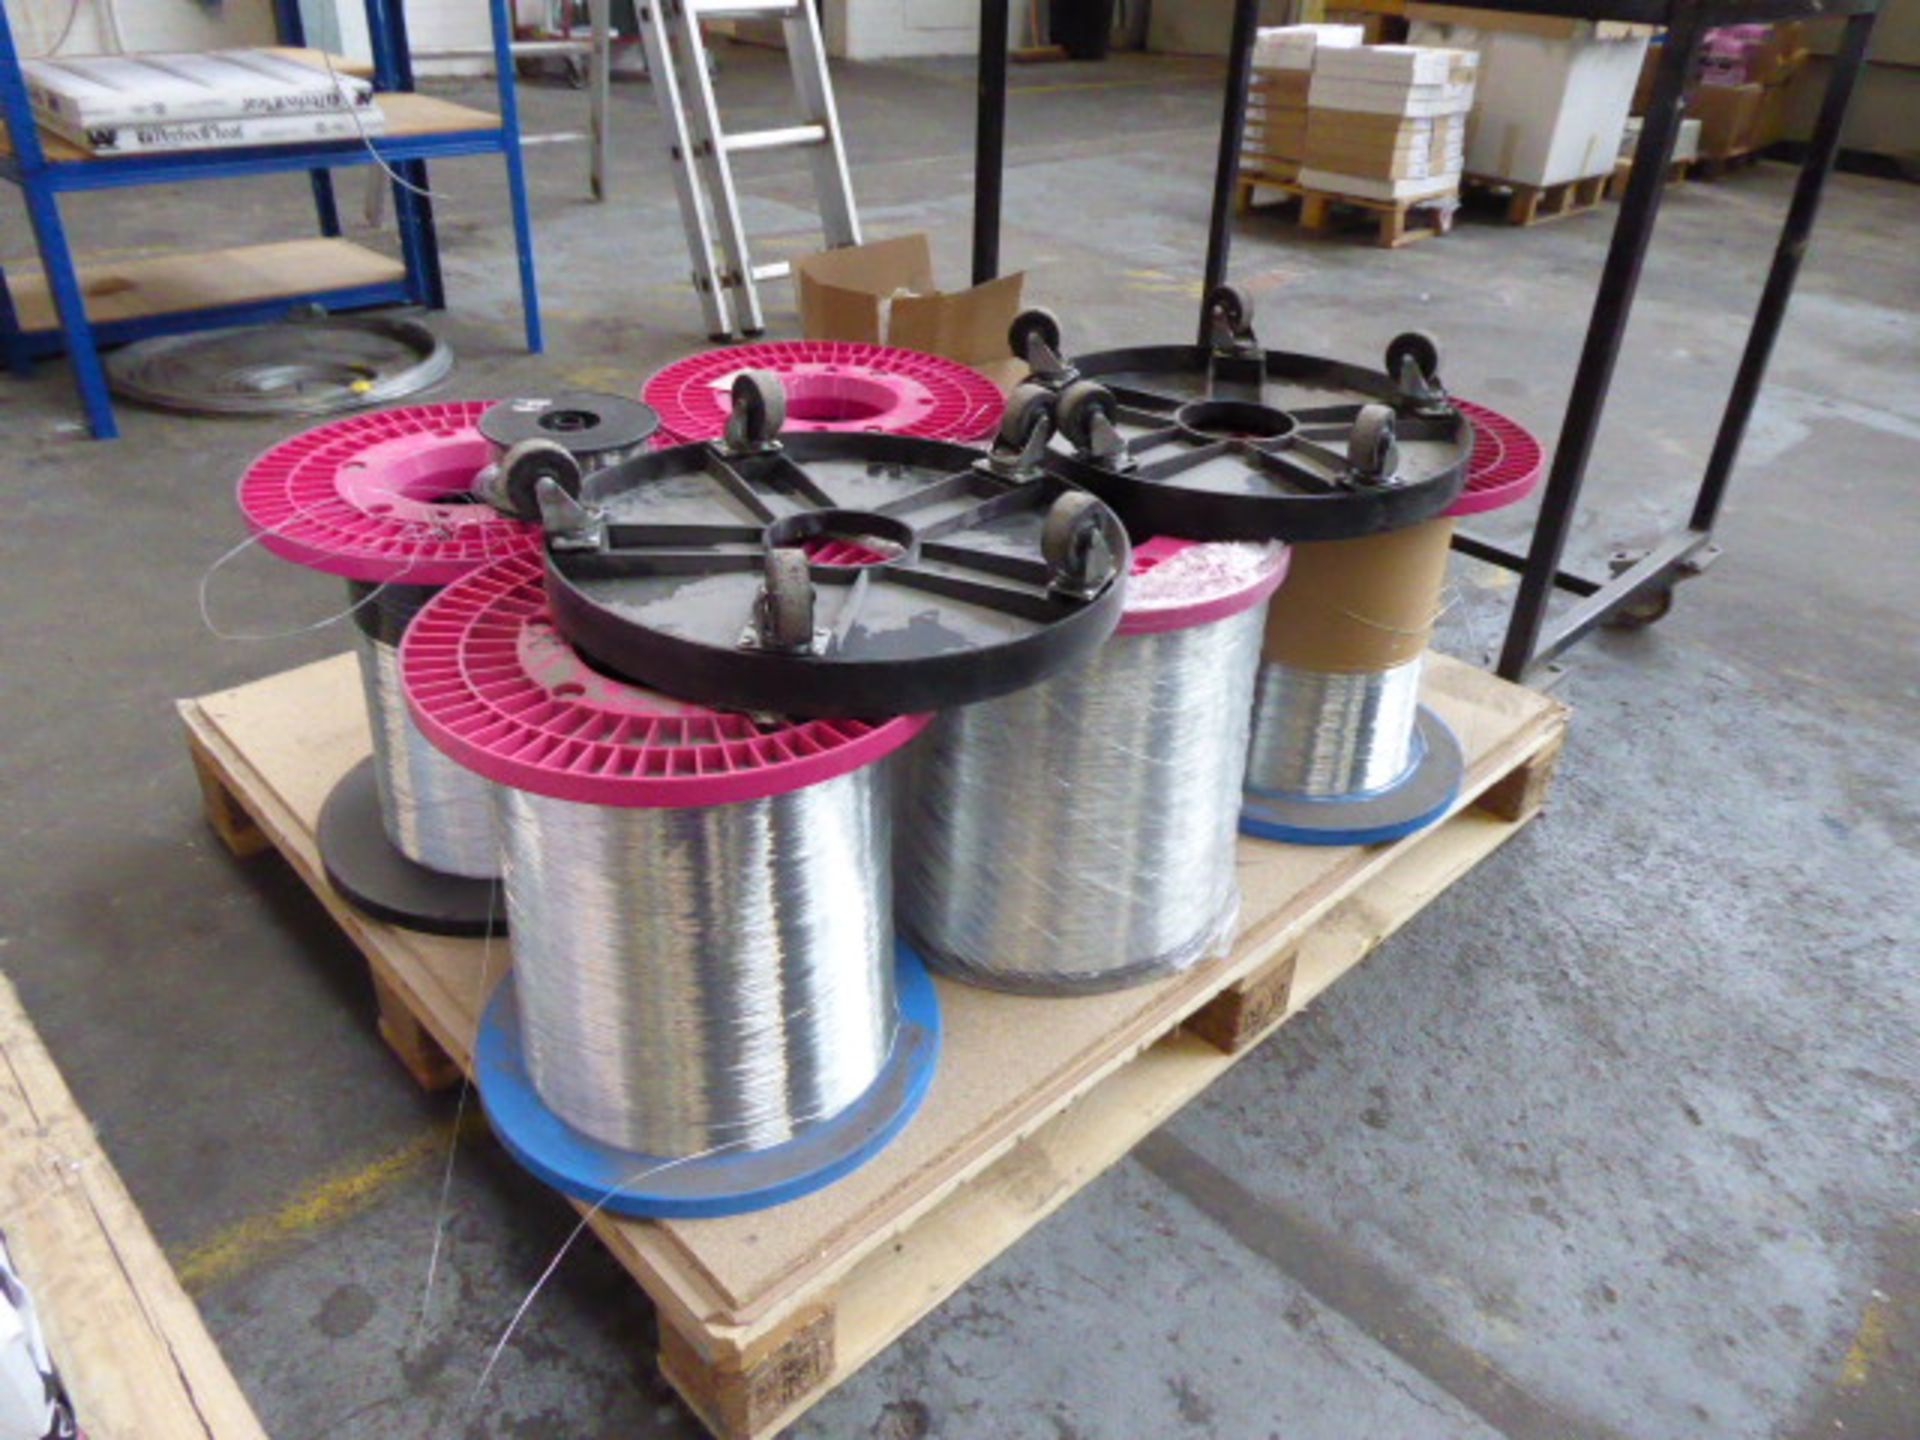 2 full reels and various part reels of Lotters stitching wire